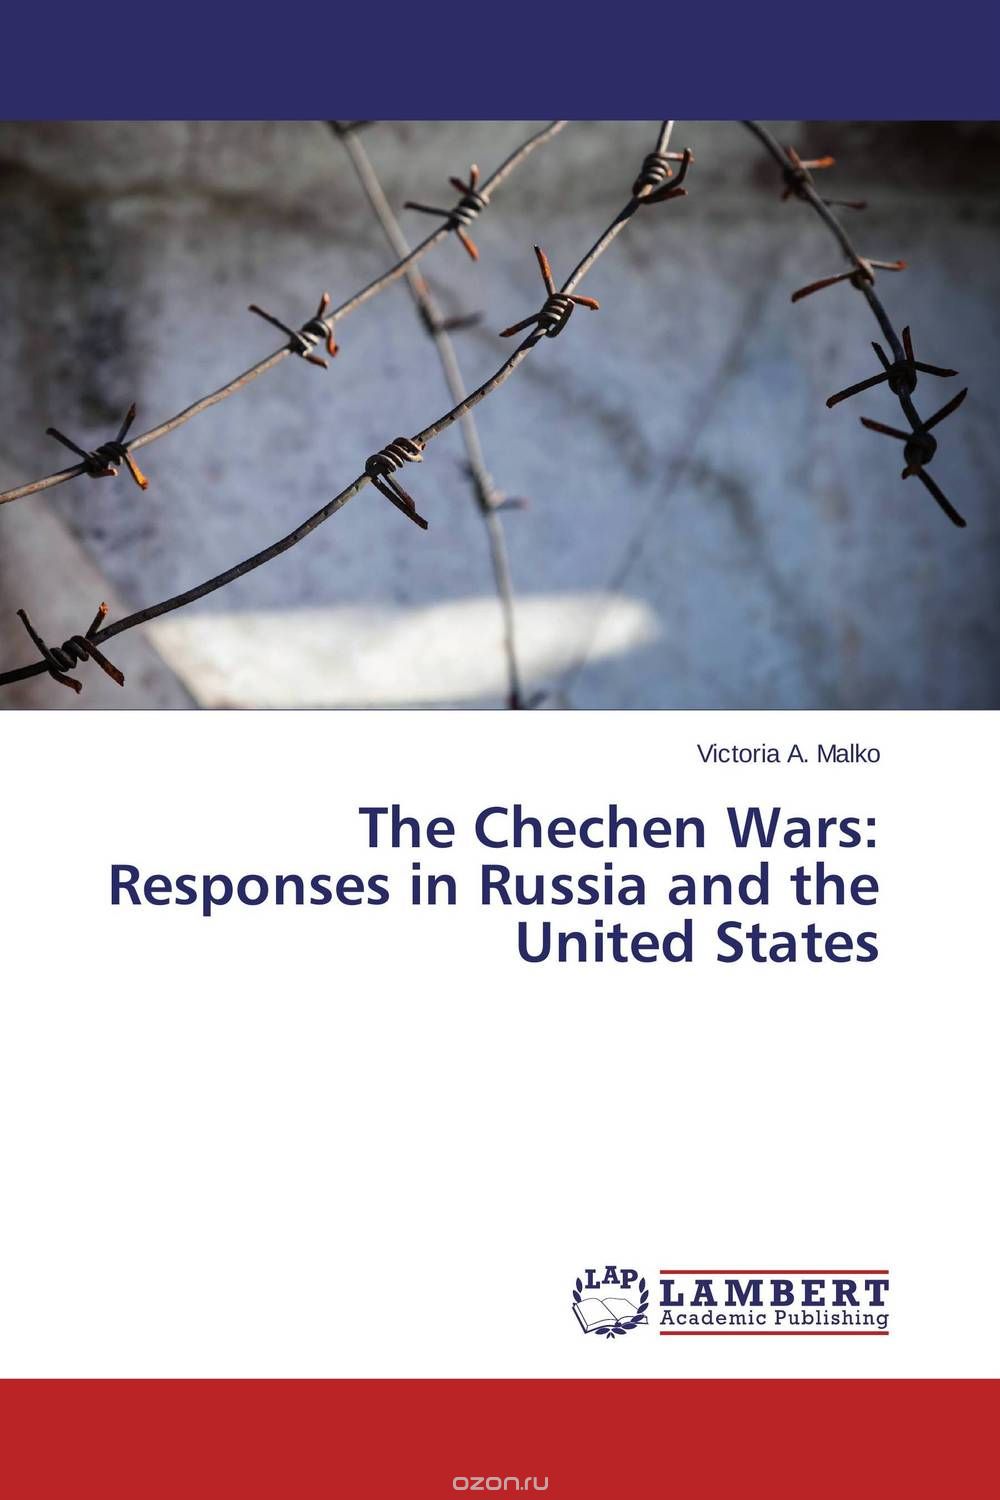 The Chechen Wars: Responses in Russia and the United States